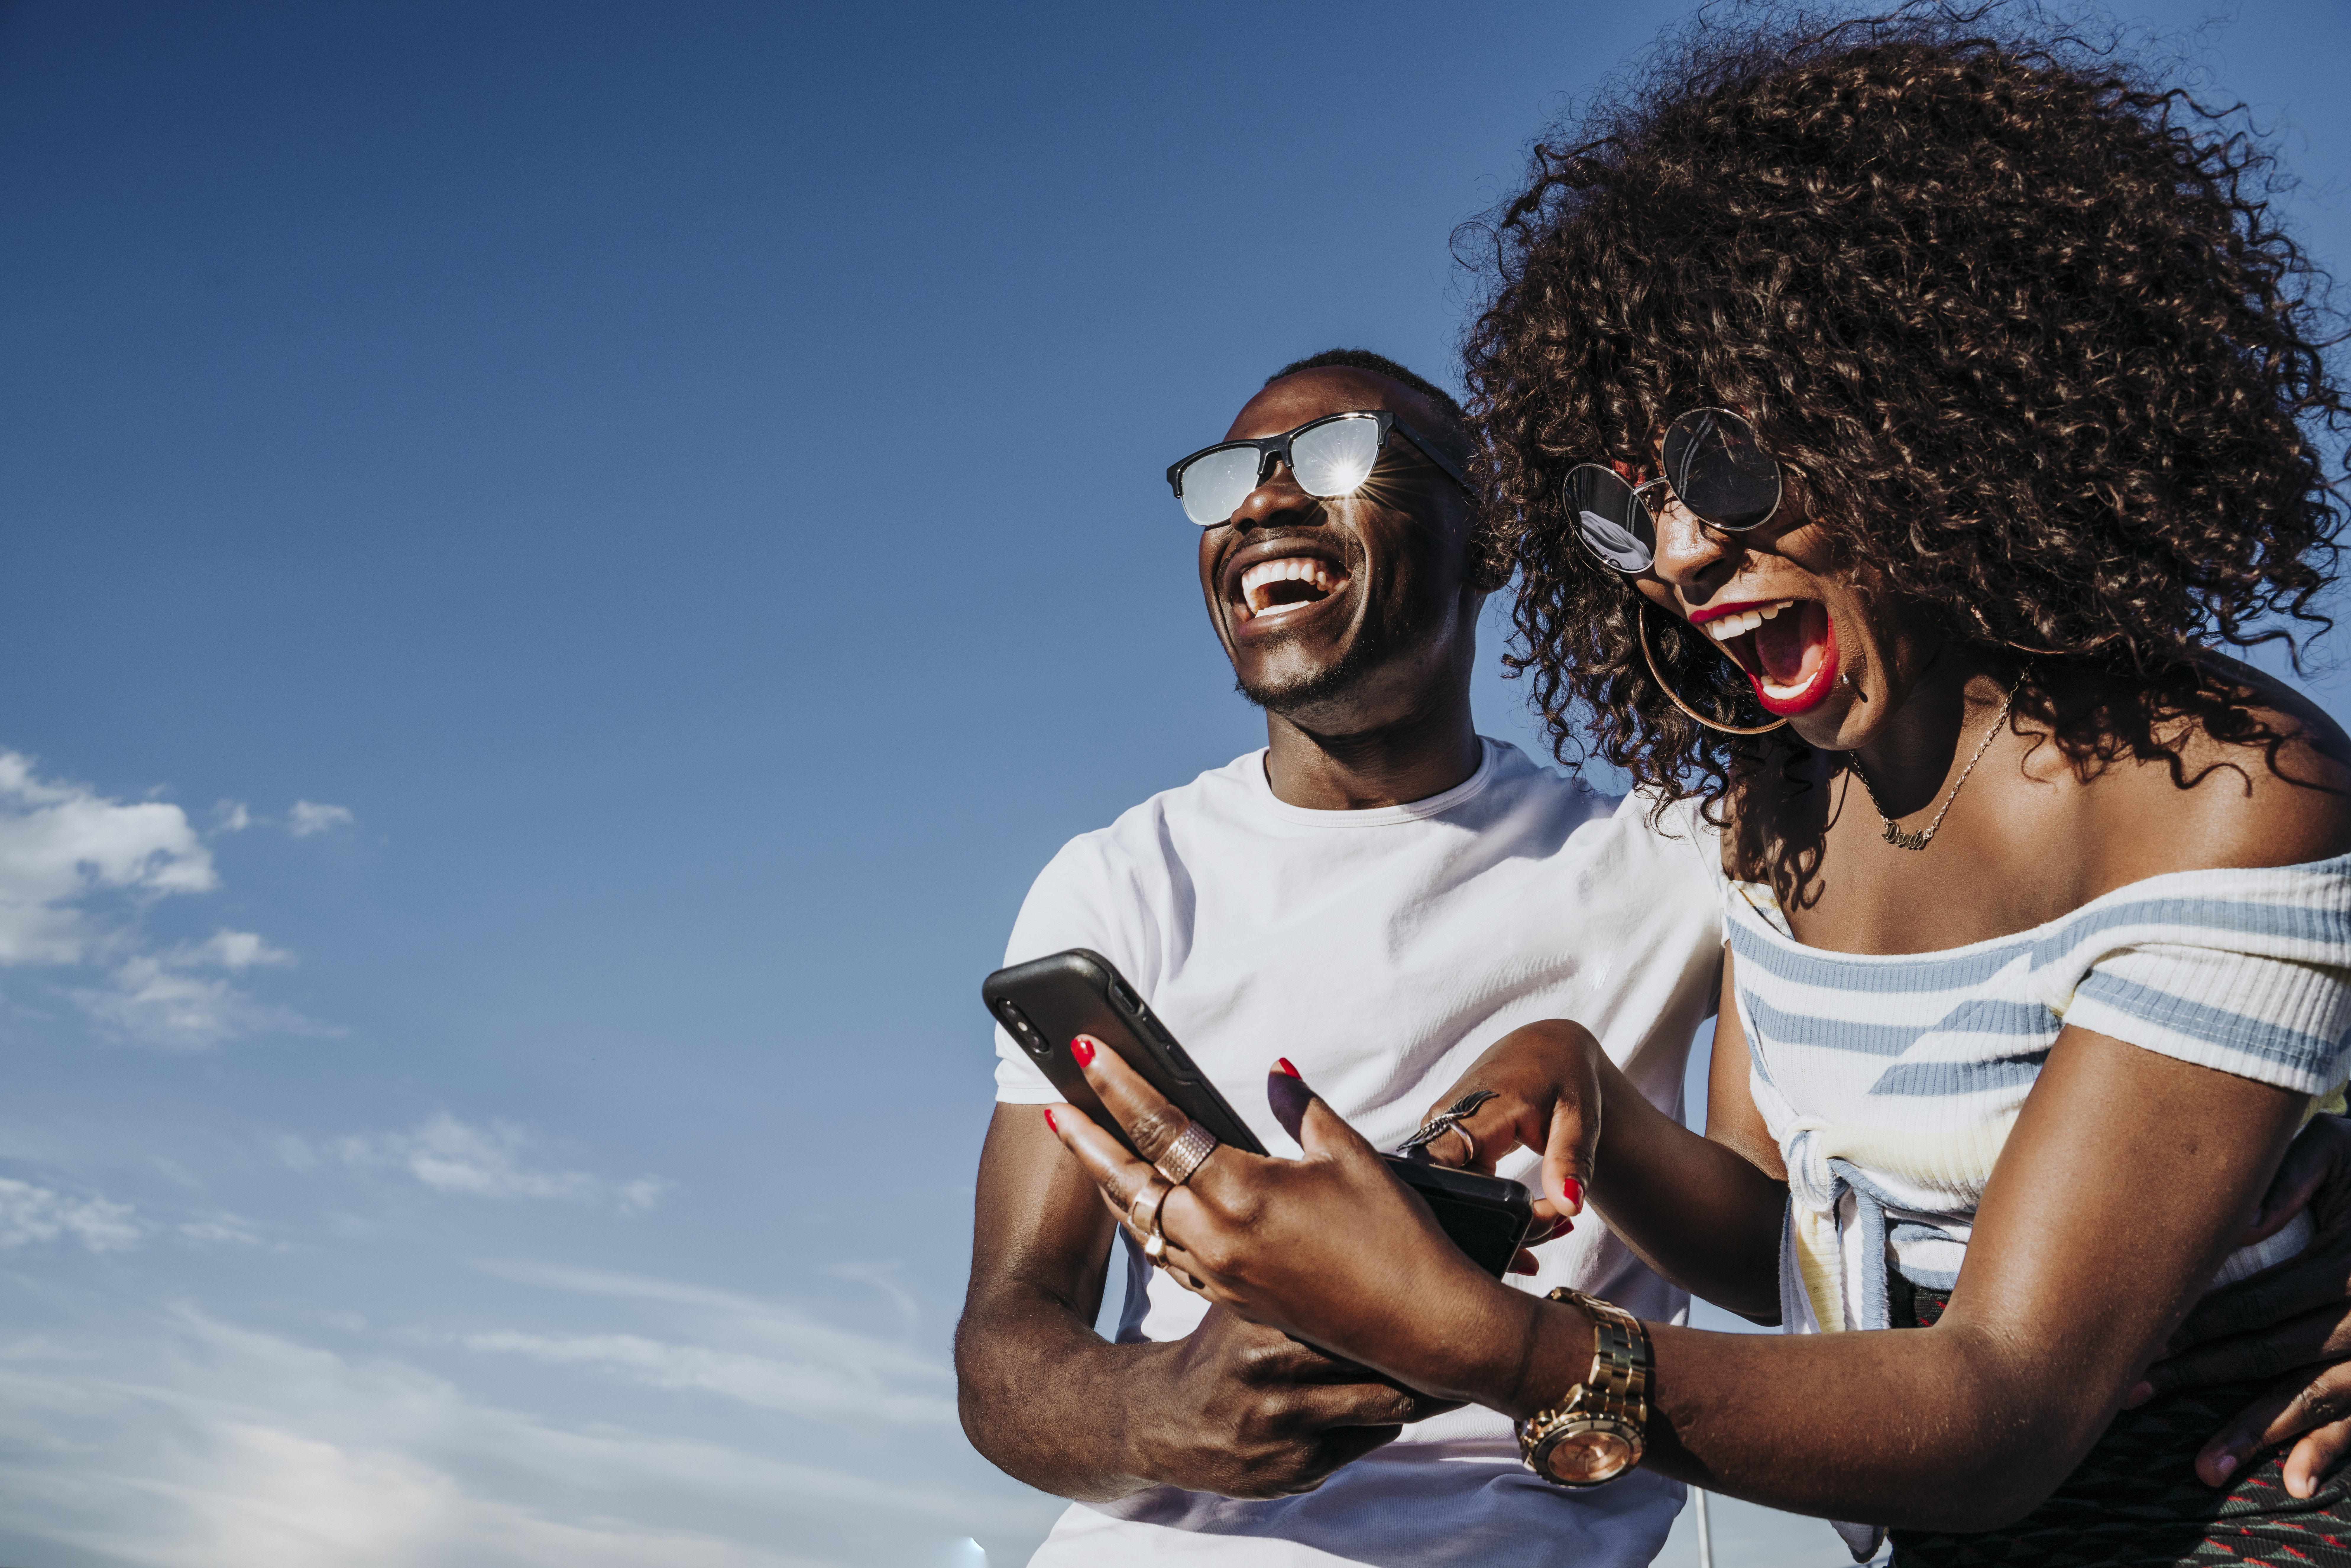 A young, African couple smiling and laughing on a bright, sunny day as the woman looks at her cell phone.